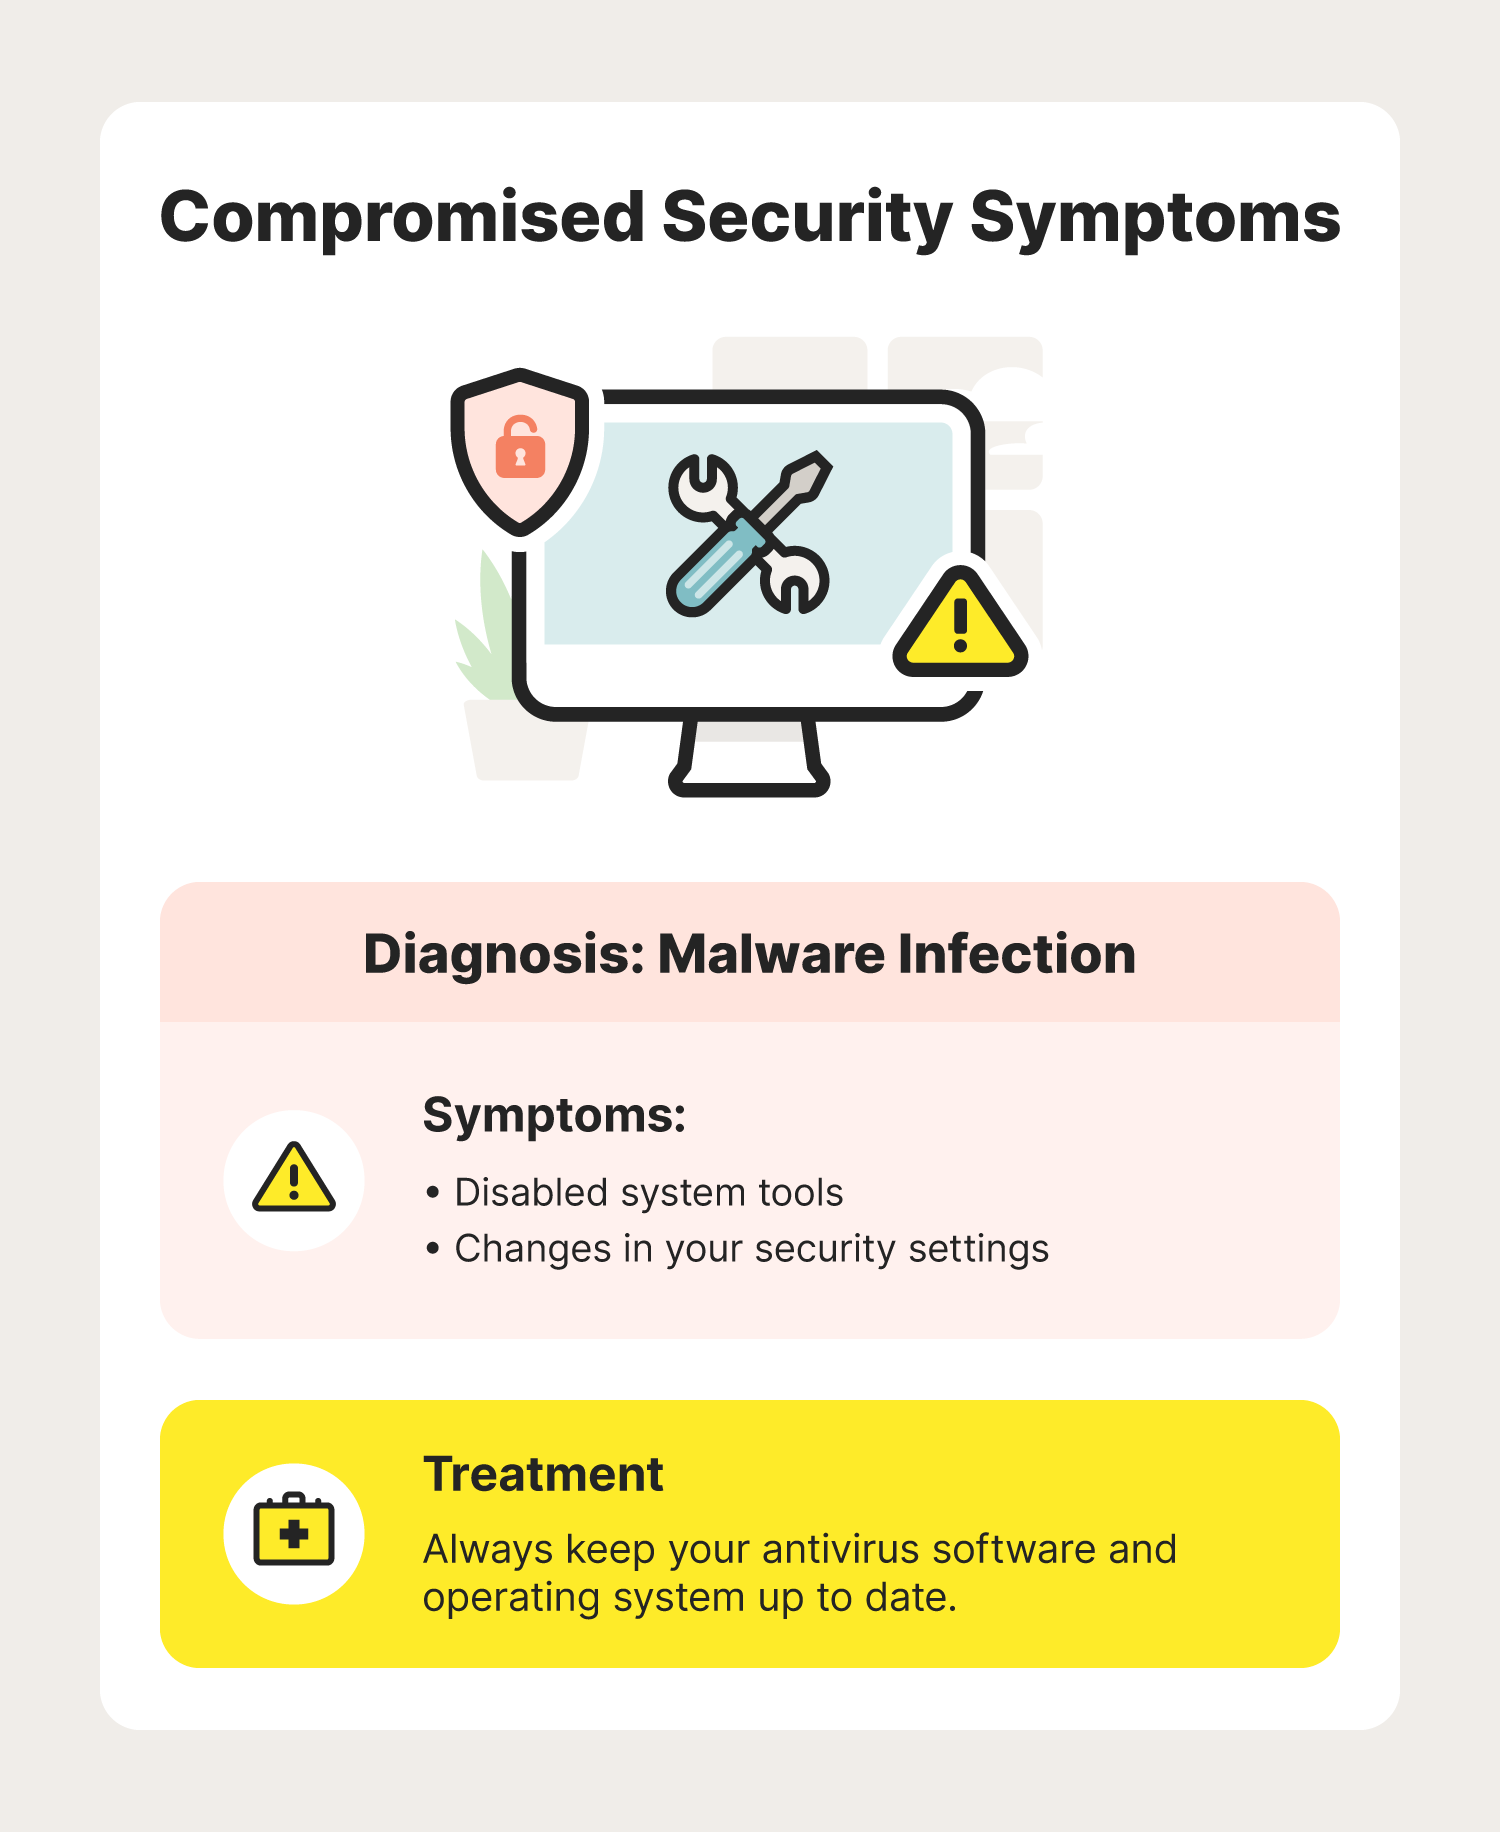 A graphic showcases compromised security symptoms that are signs of malware.